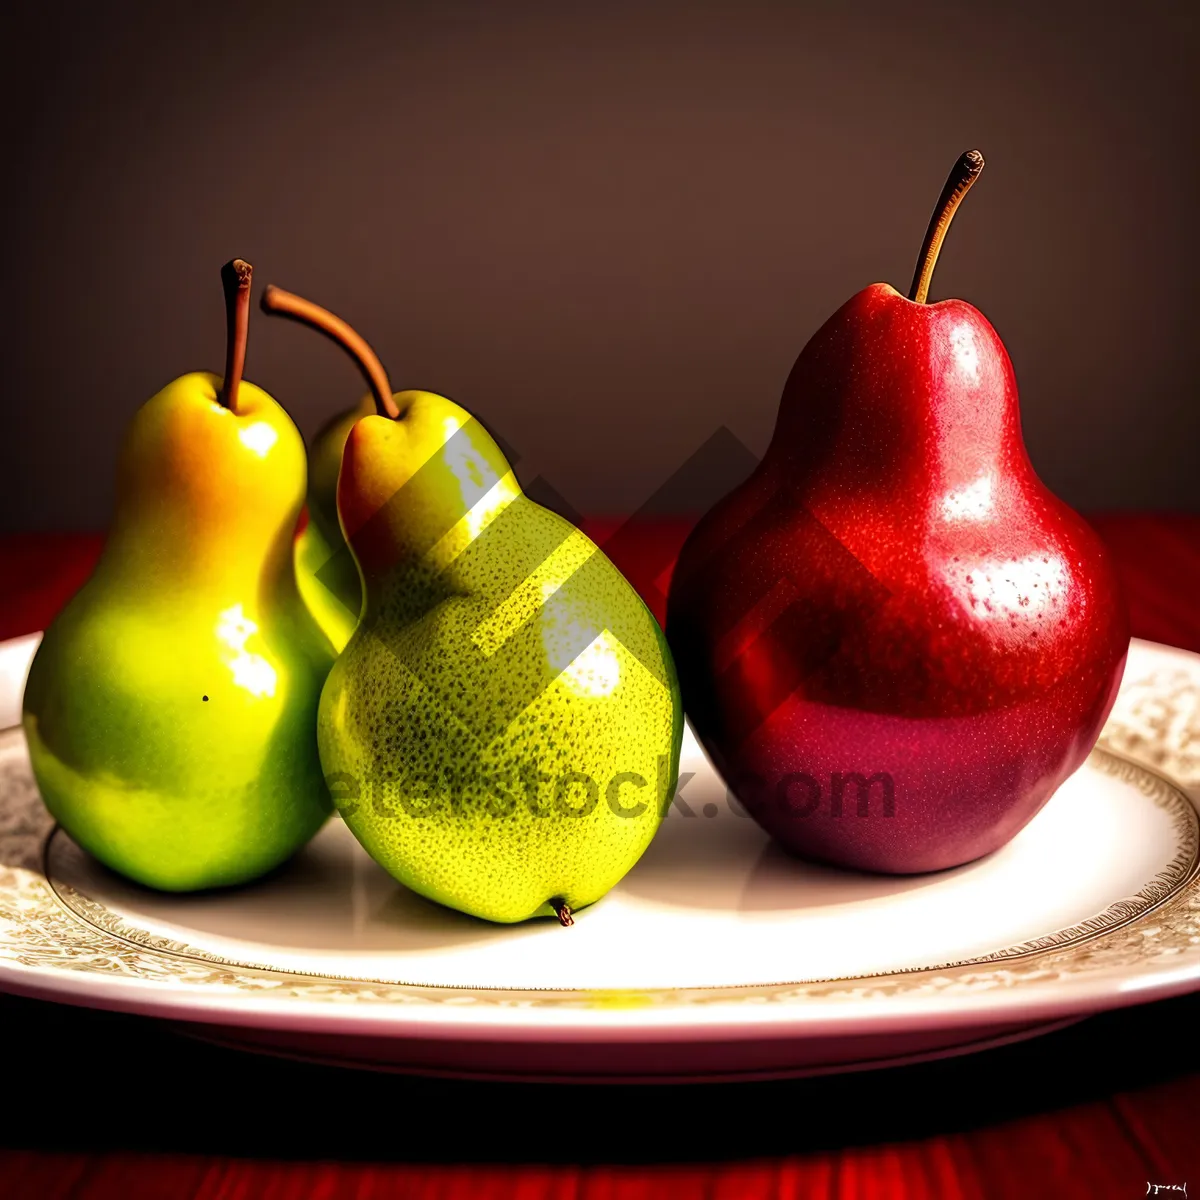 Picture of Juicy Pear - Sweet and Healthy Edible Fruit